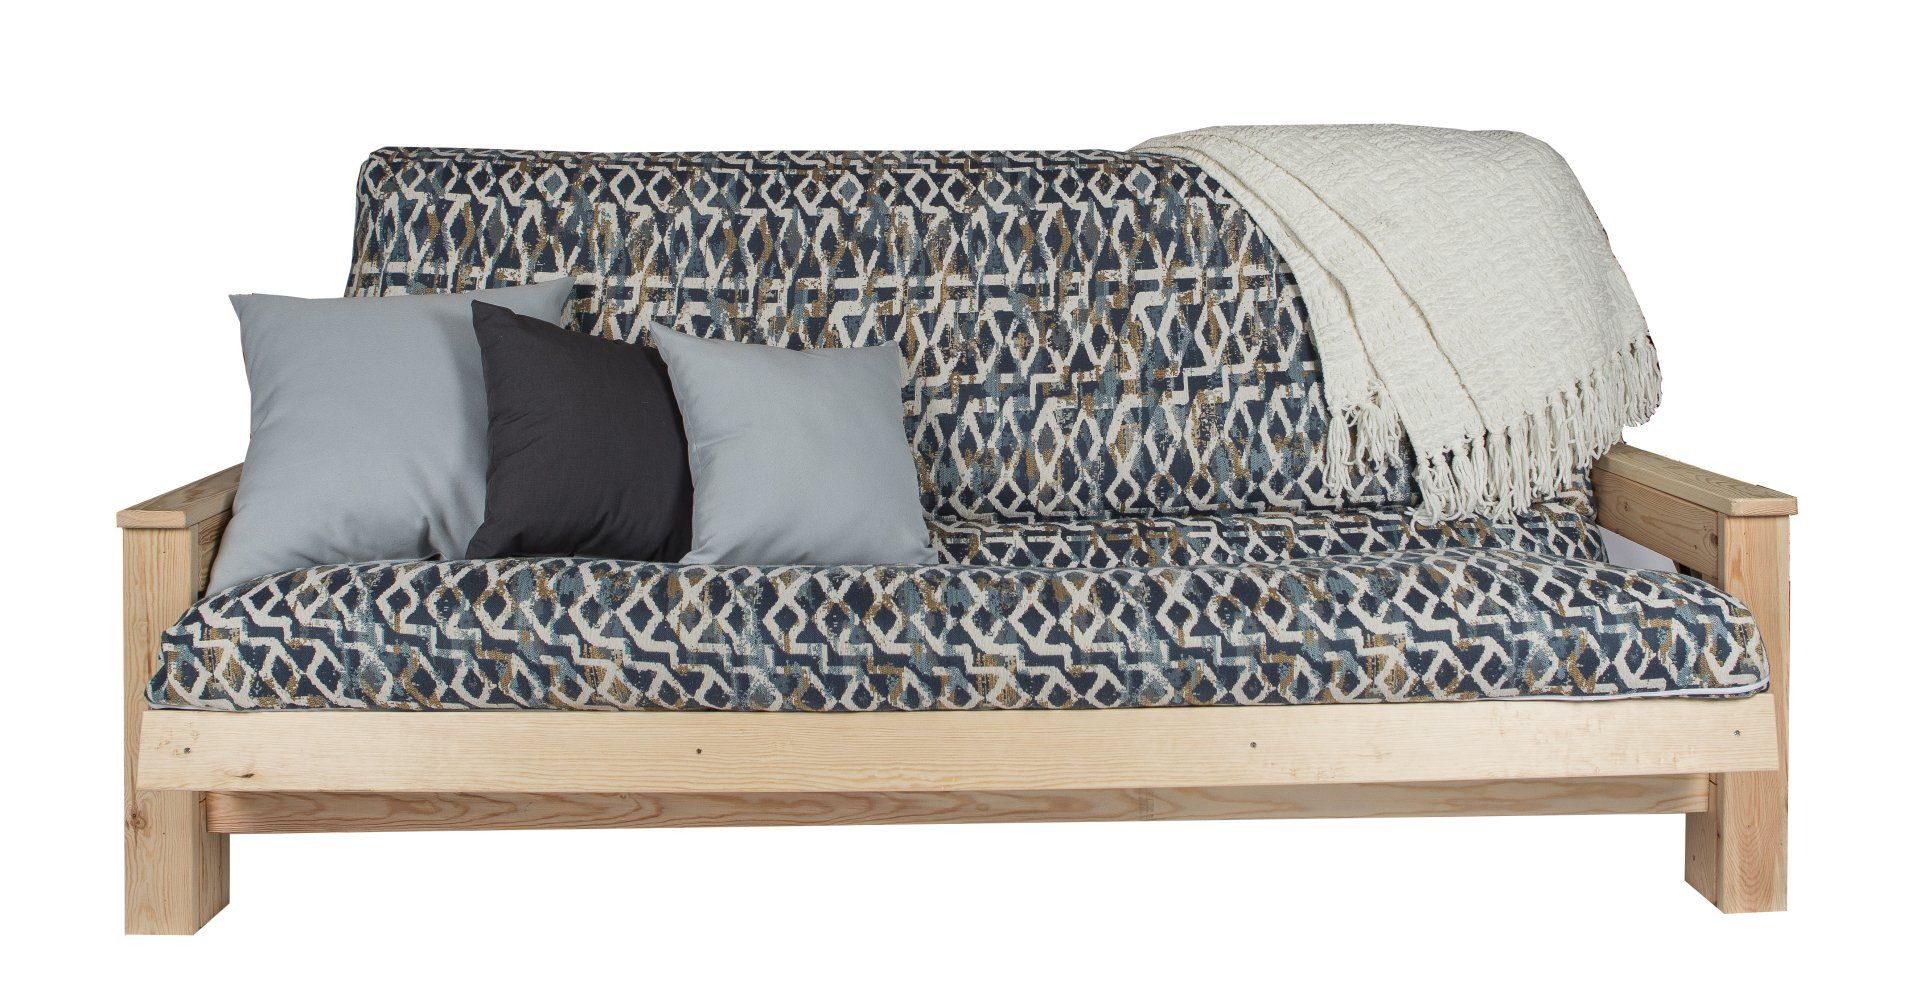 futon on sale grey and blue cover with wool blanket